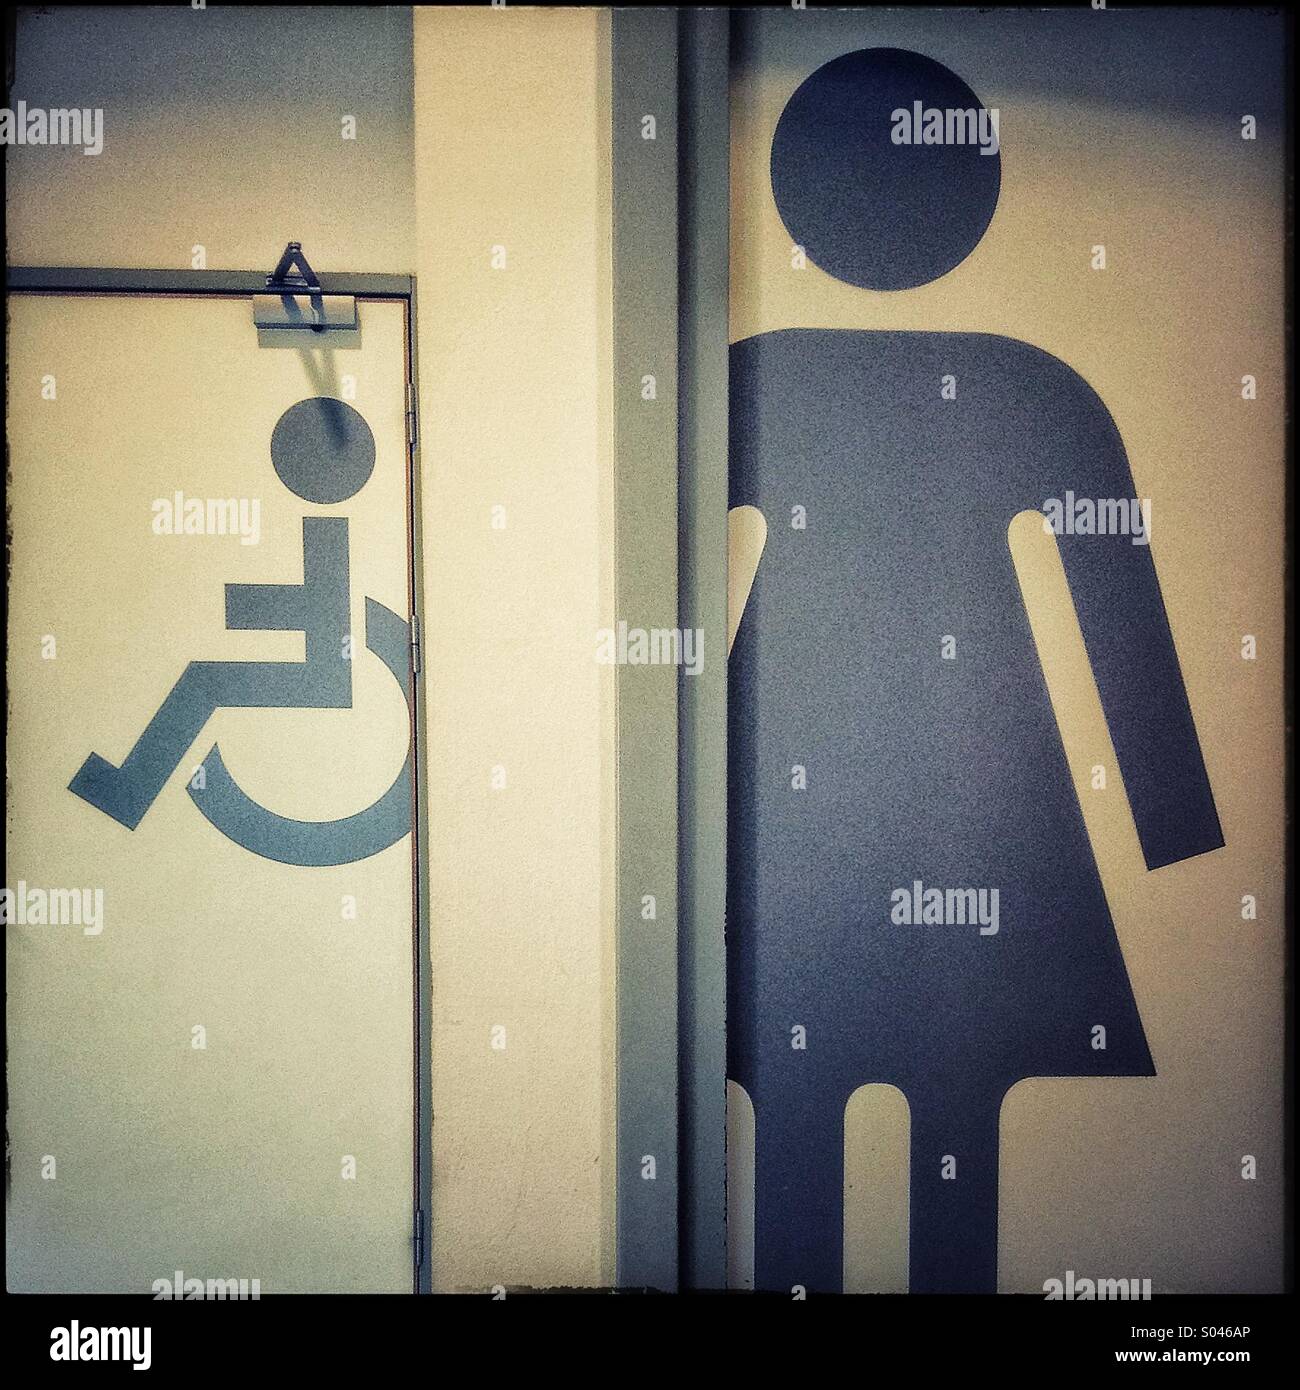 Women and disabled toilet signs Stock Photo